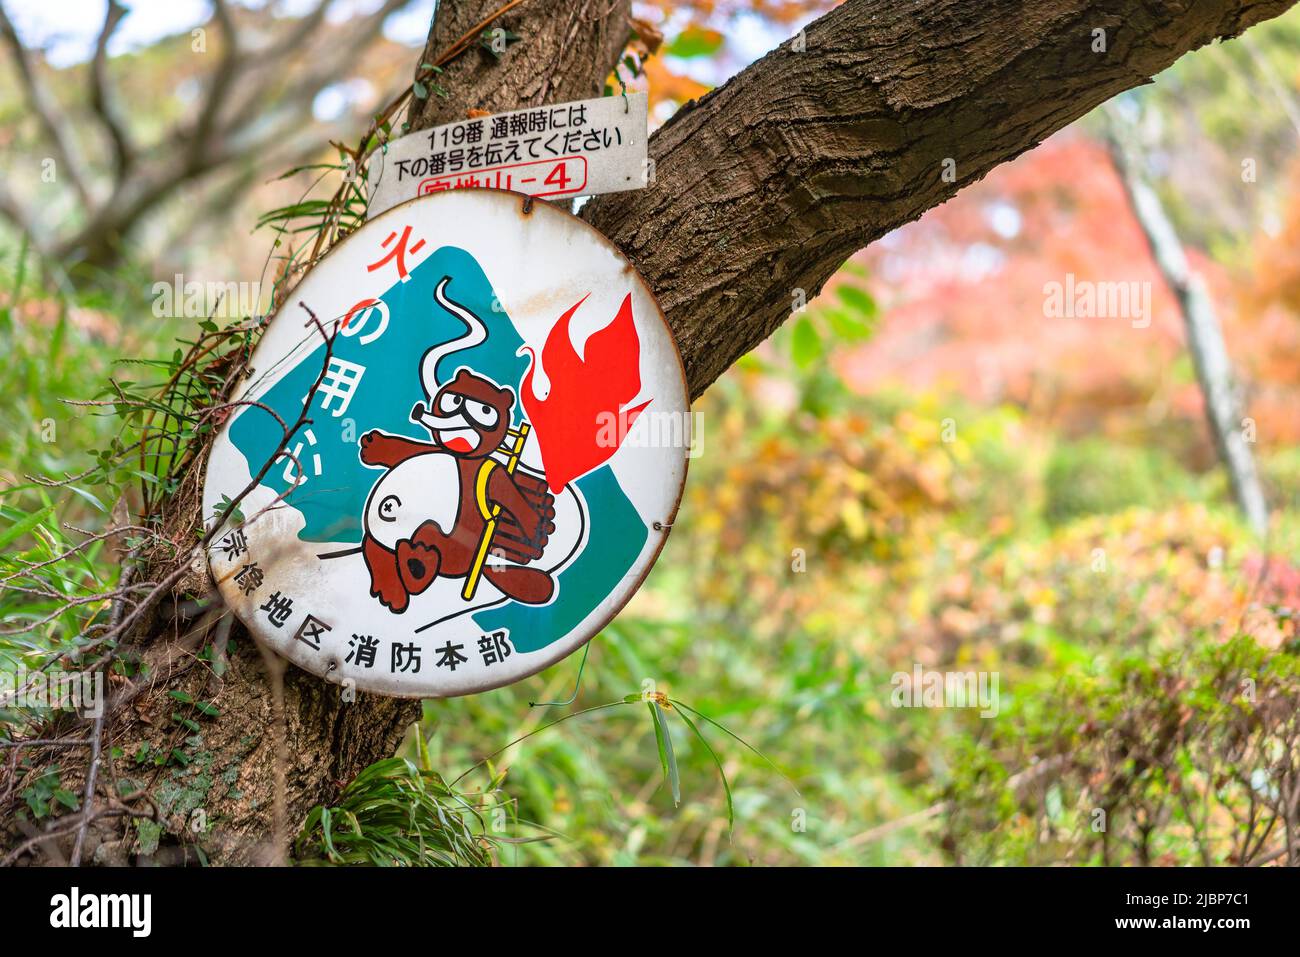 kyushu, japan - december 08 2021: Close up on a rusted metal sign illustrated with a tanuki racoon dog from the Japanese folktale Kachi-kachi Yama pre Stock Photo